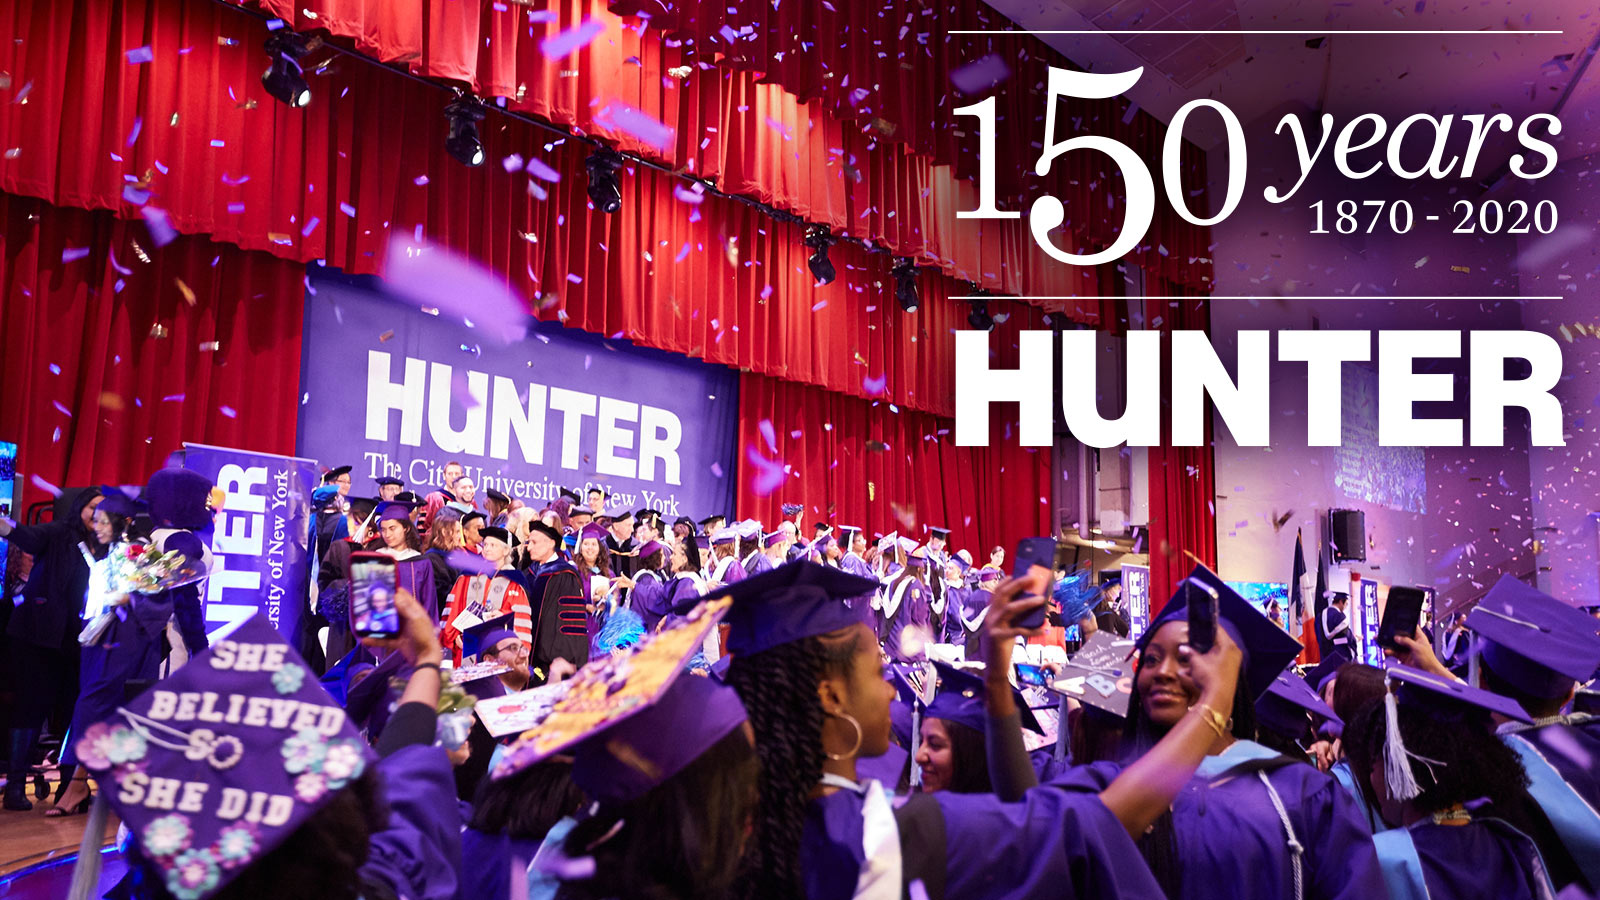 Hunter commencement with confetti and 150th anniversary logo